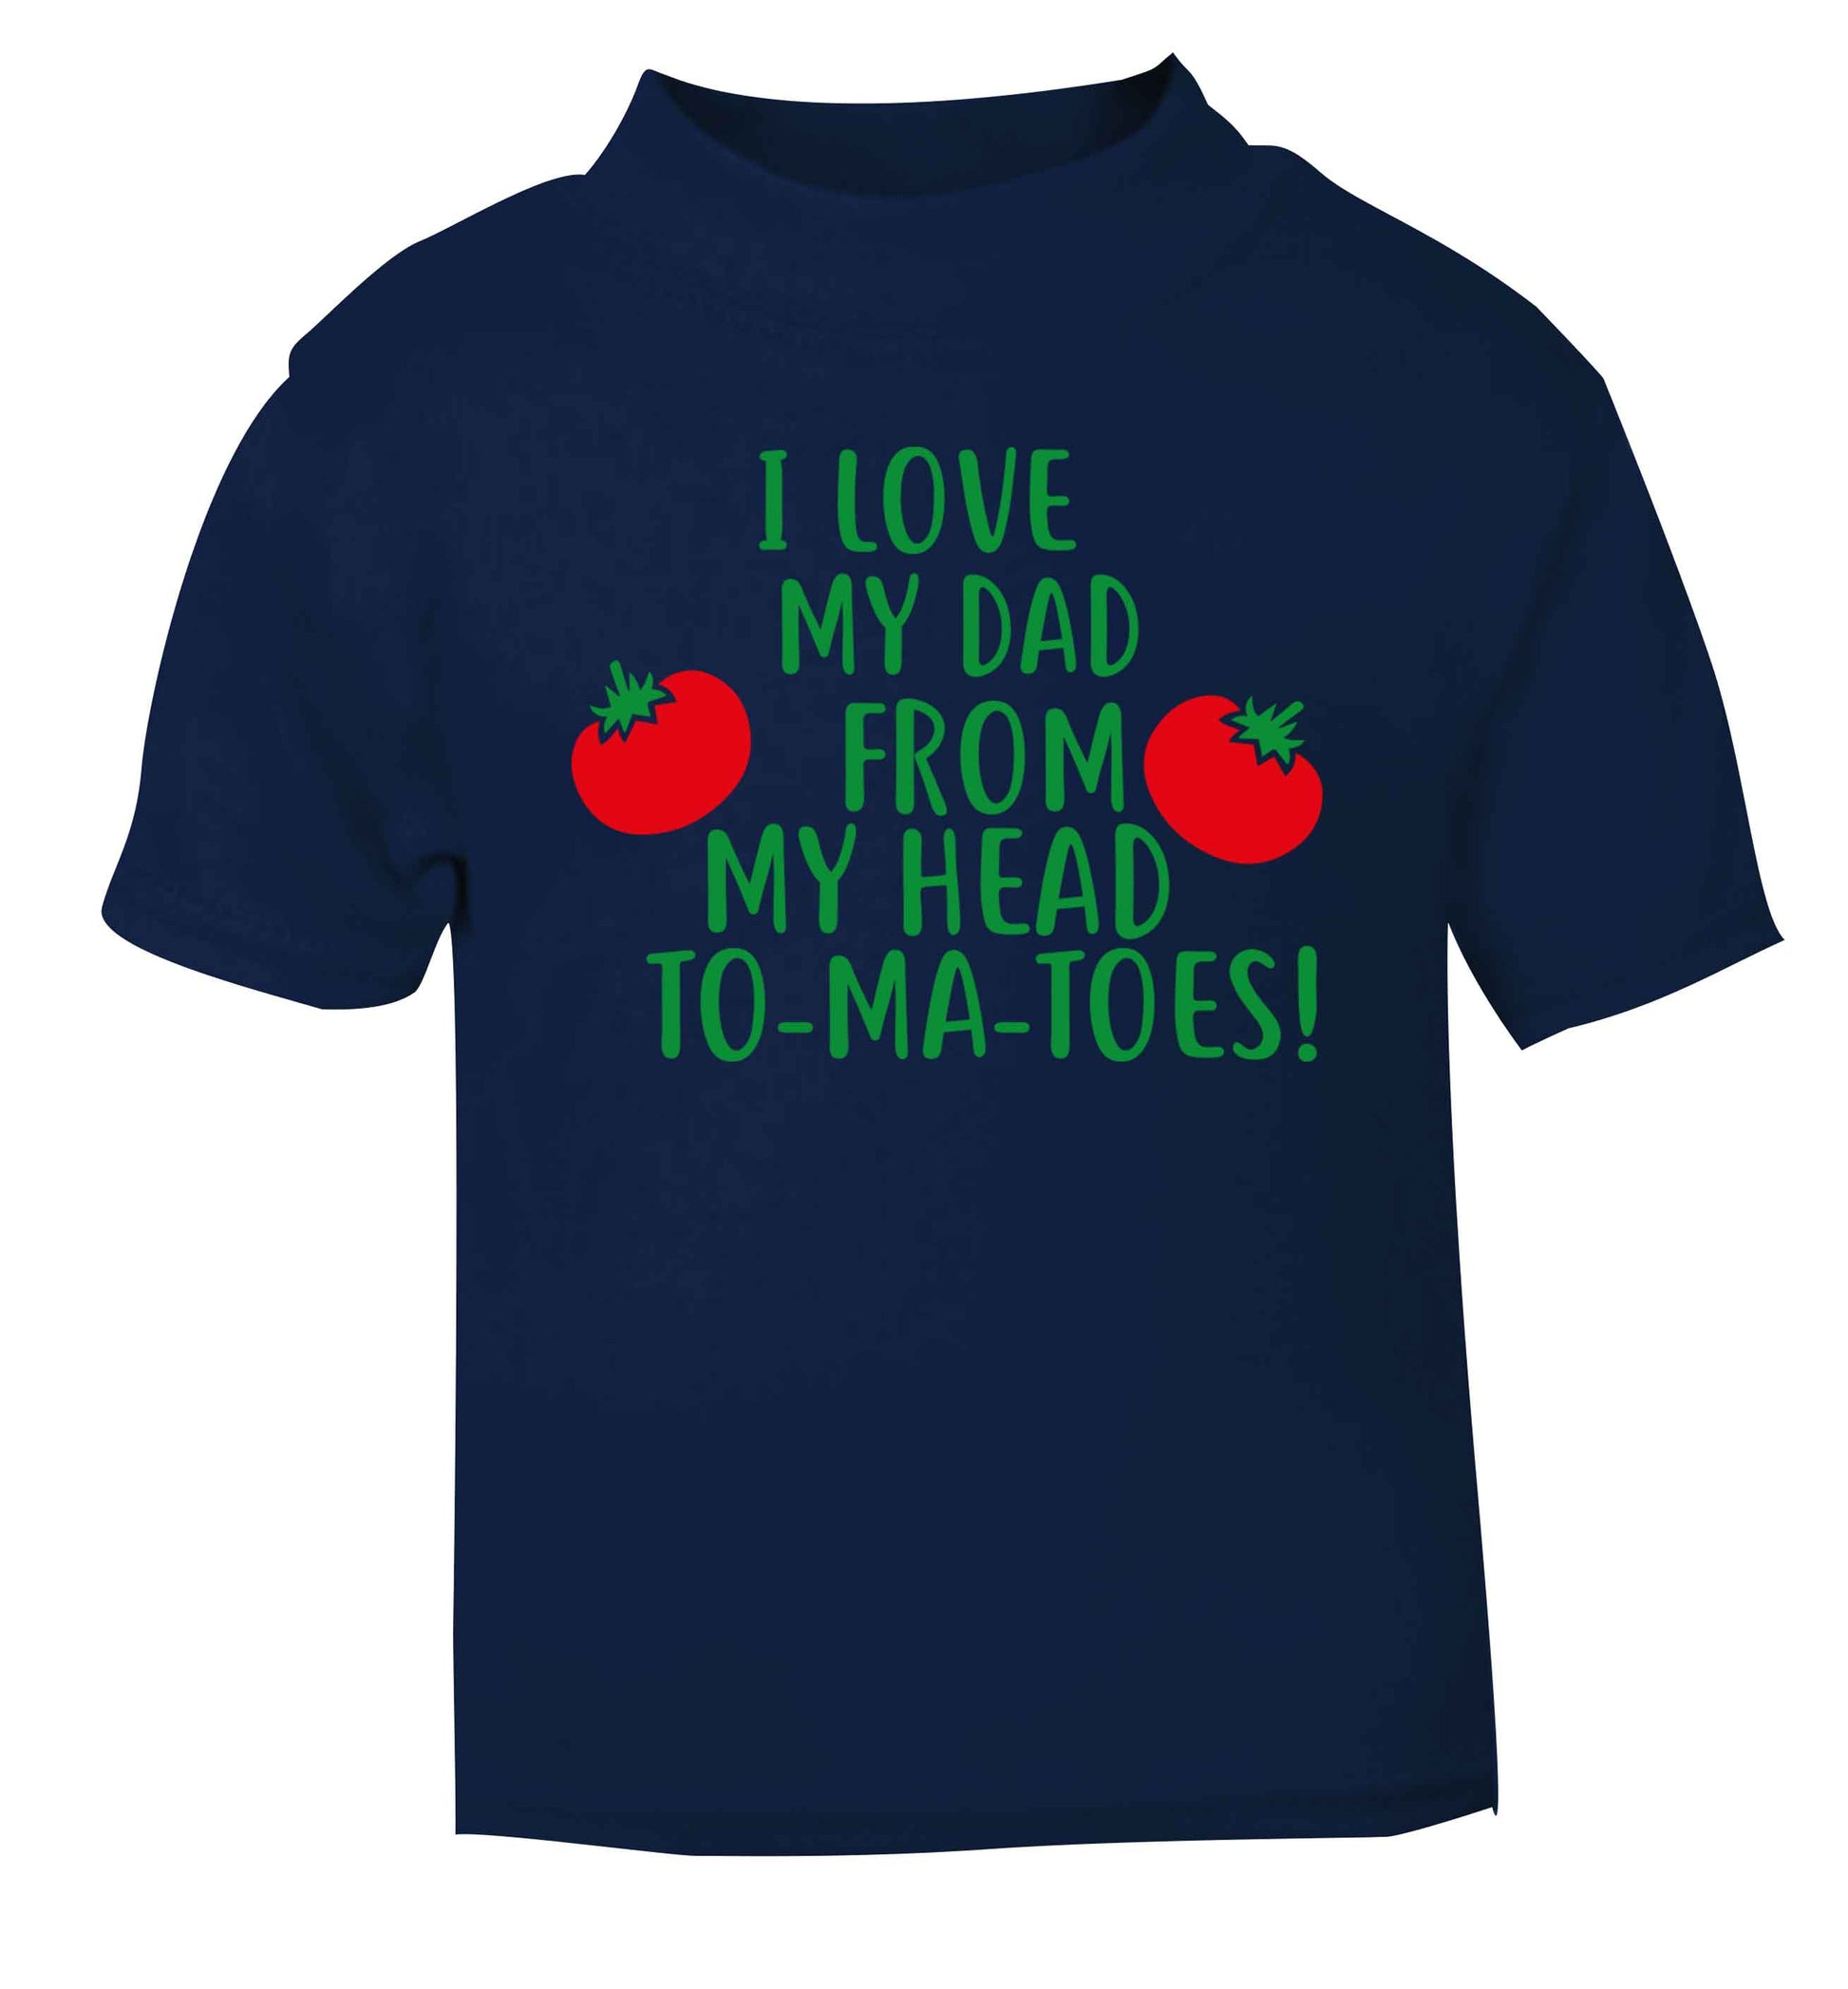 I love my dad from my head to-ma-toes navy baby toddler Tshirt 2 Years